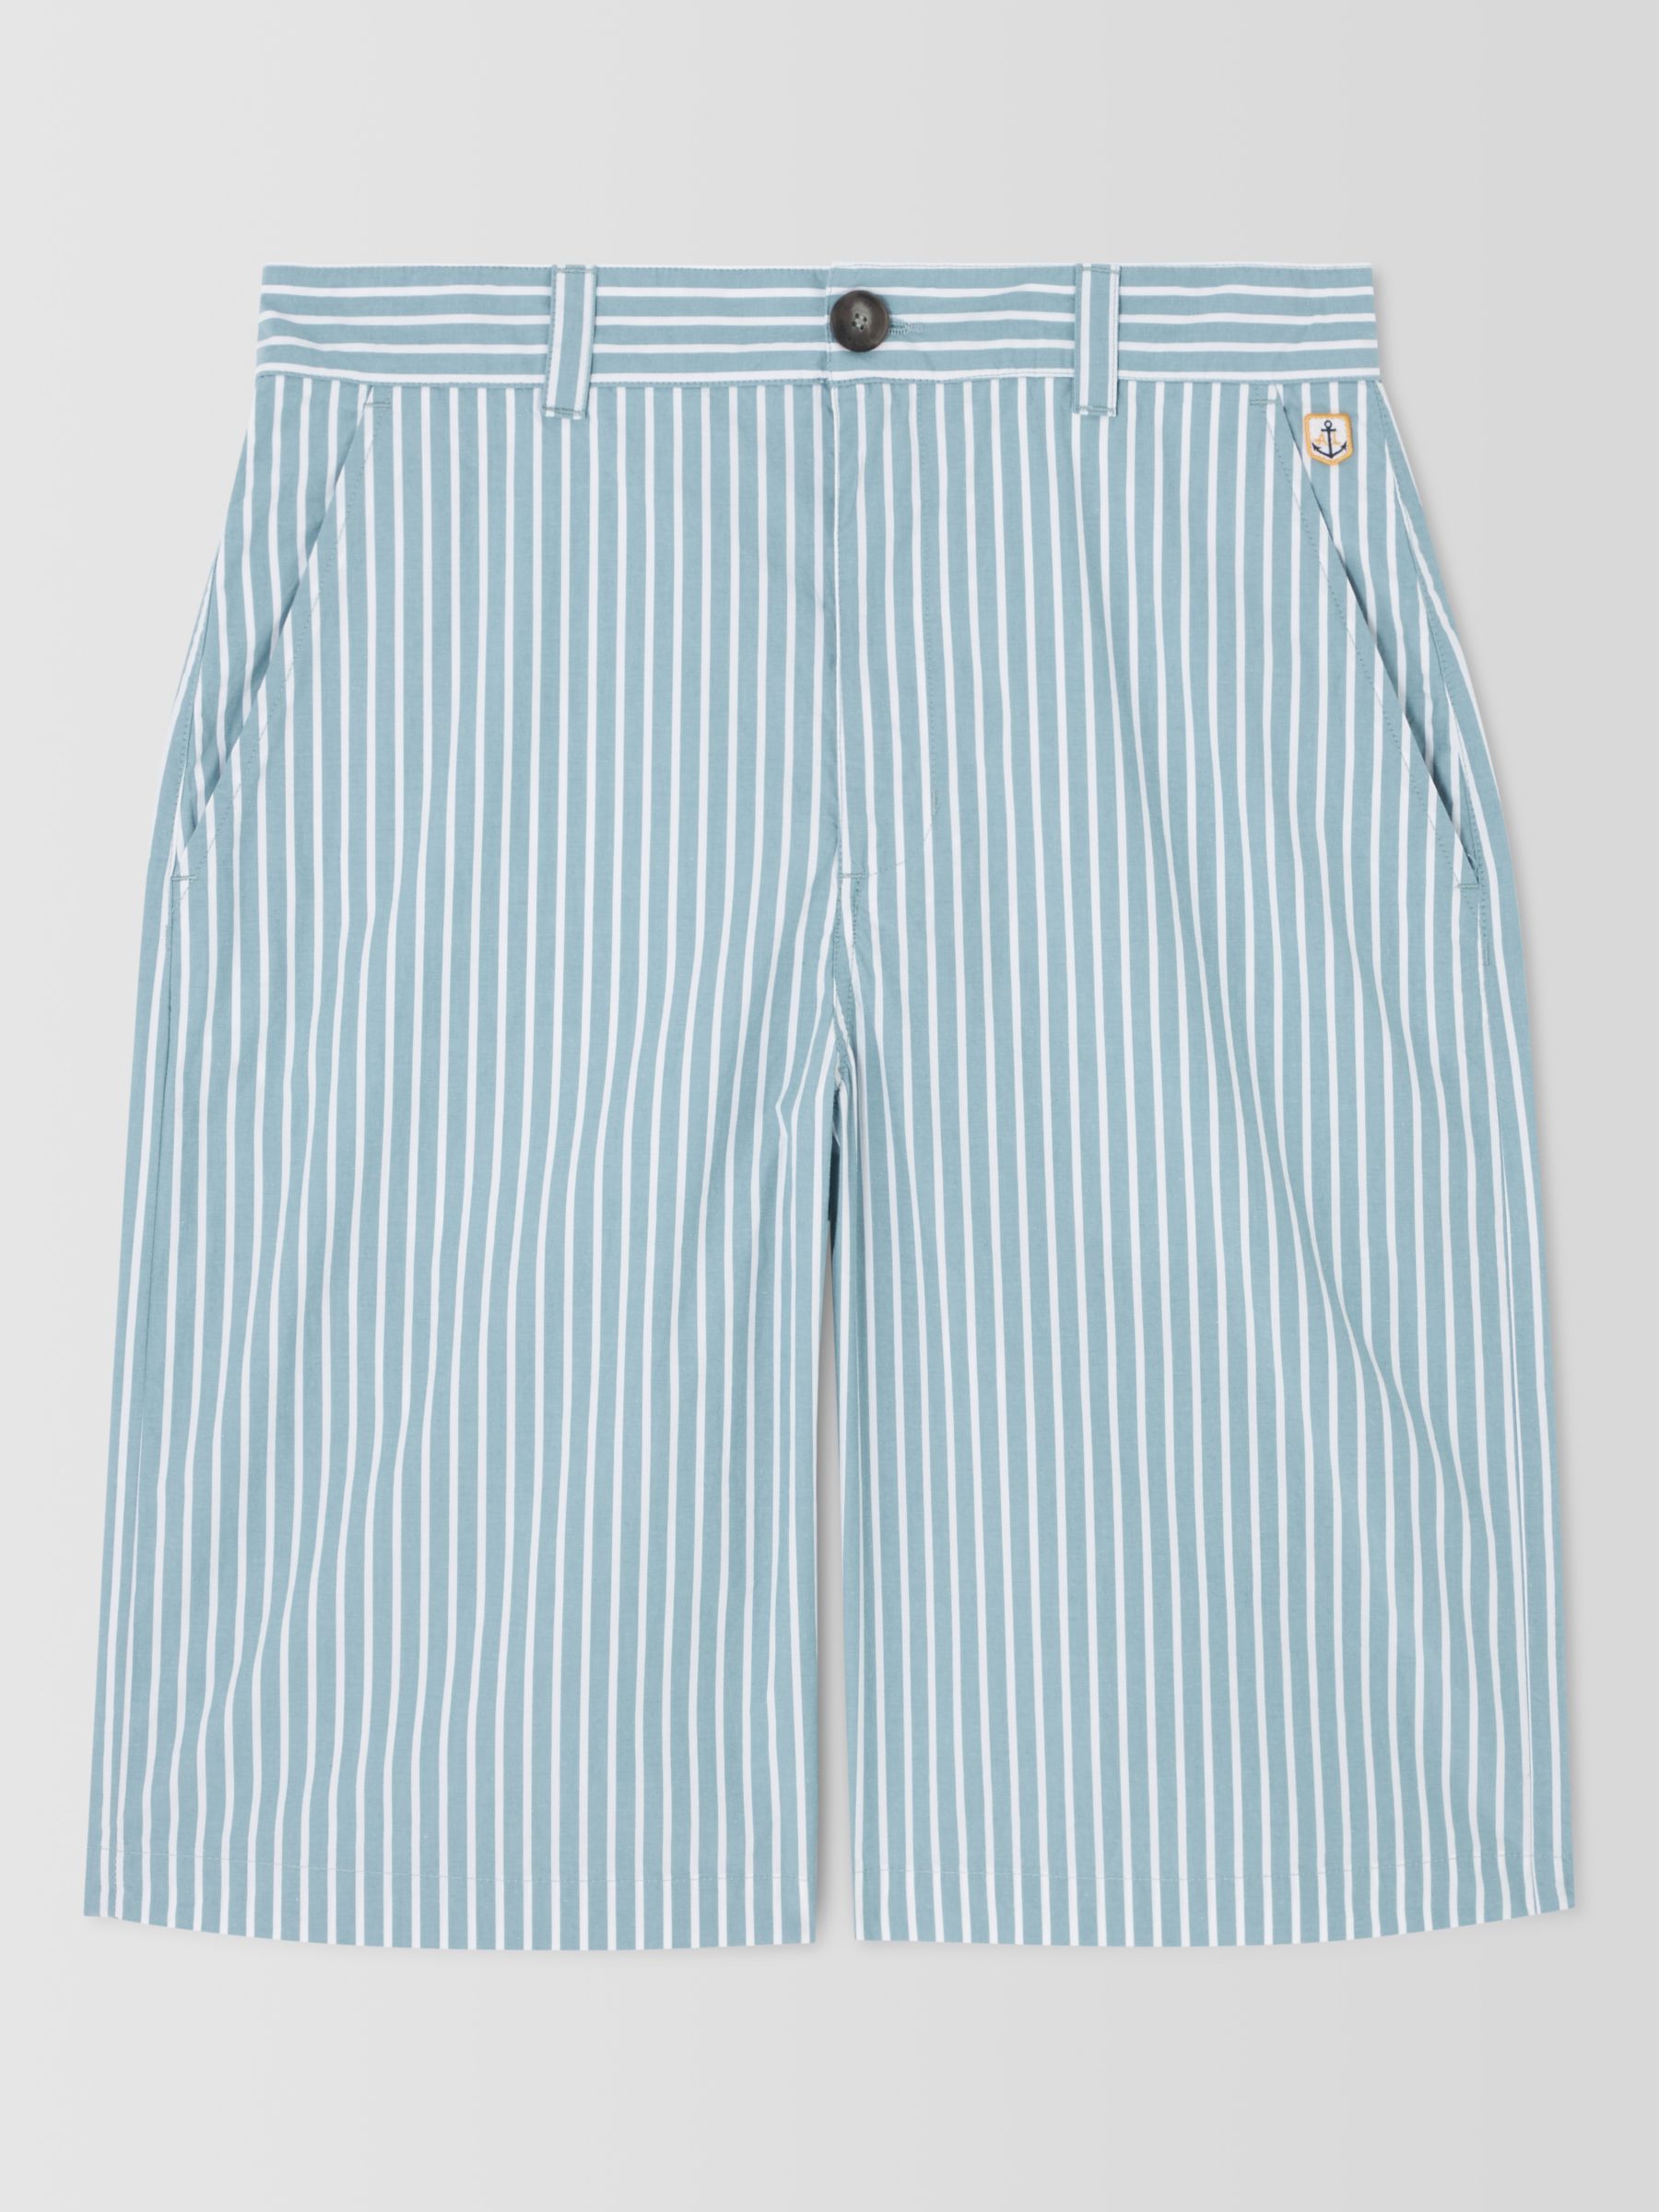 Armor Lux Raye Heritage Striped Shorts, Blue/White, S